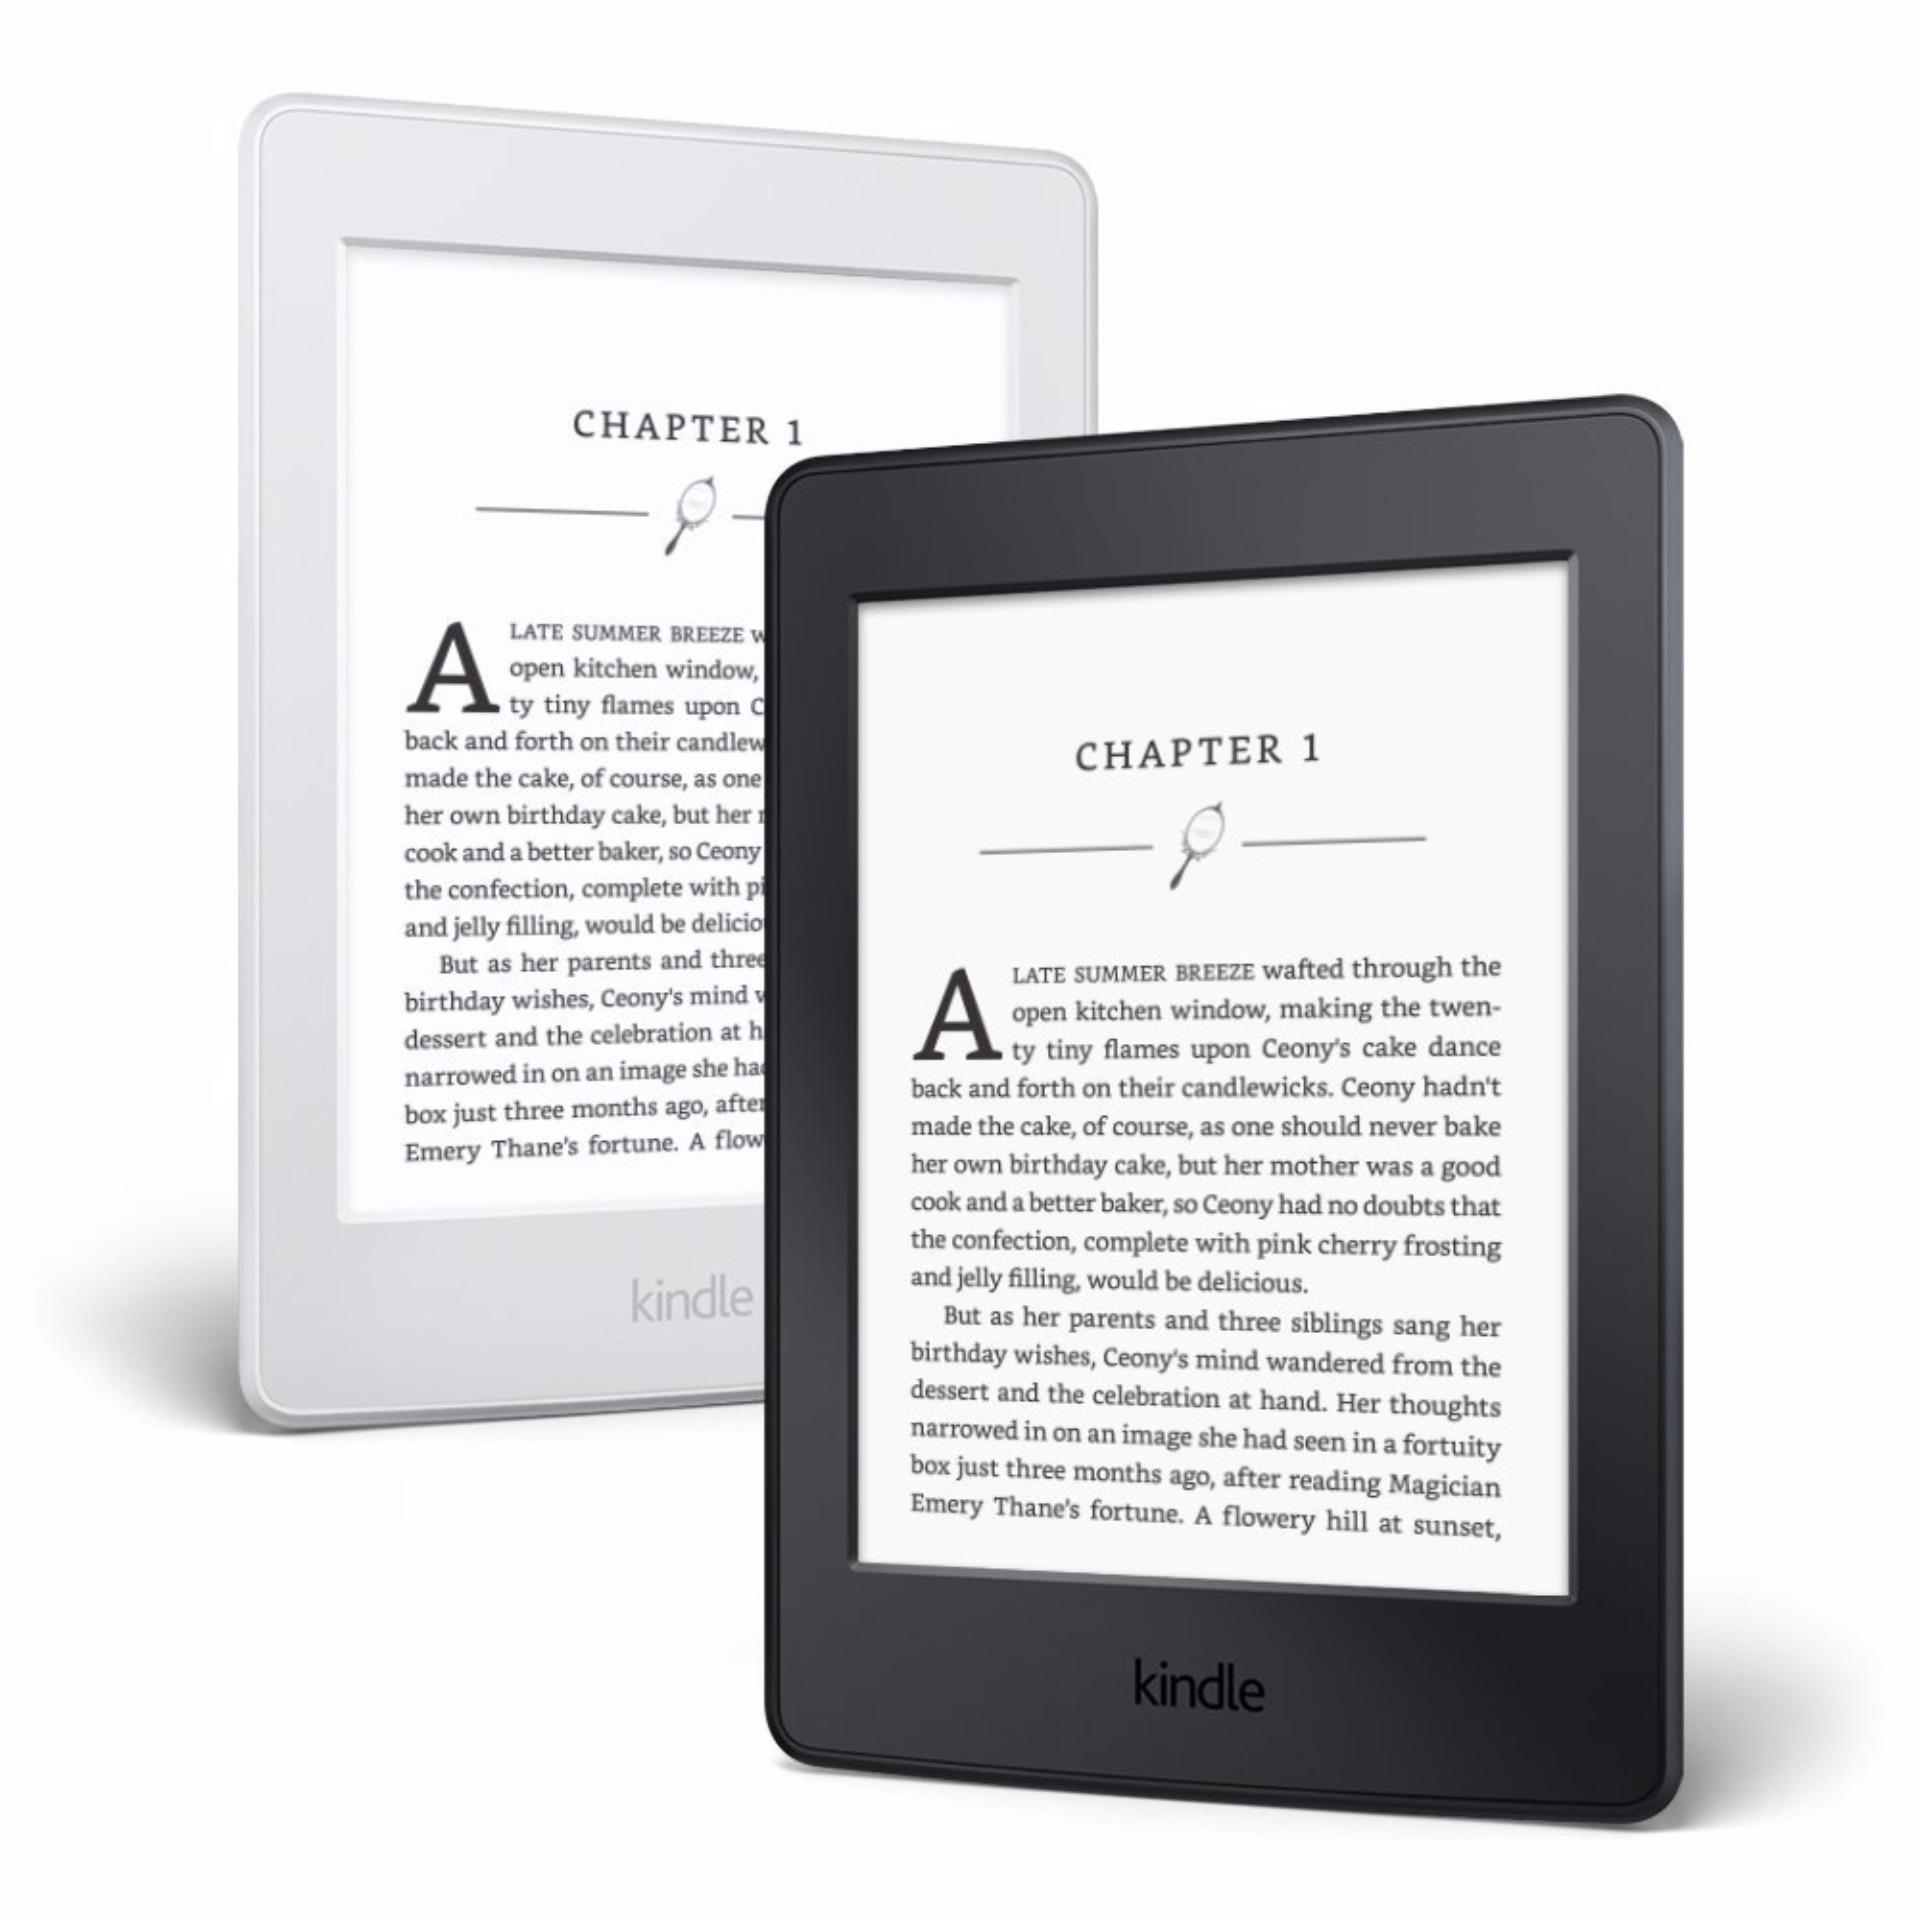 Certified Refurbished Kindle Paperwhite E-reader - White, 6